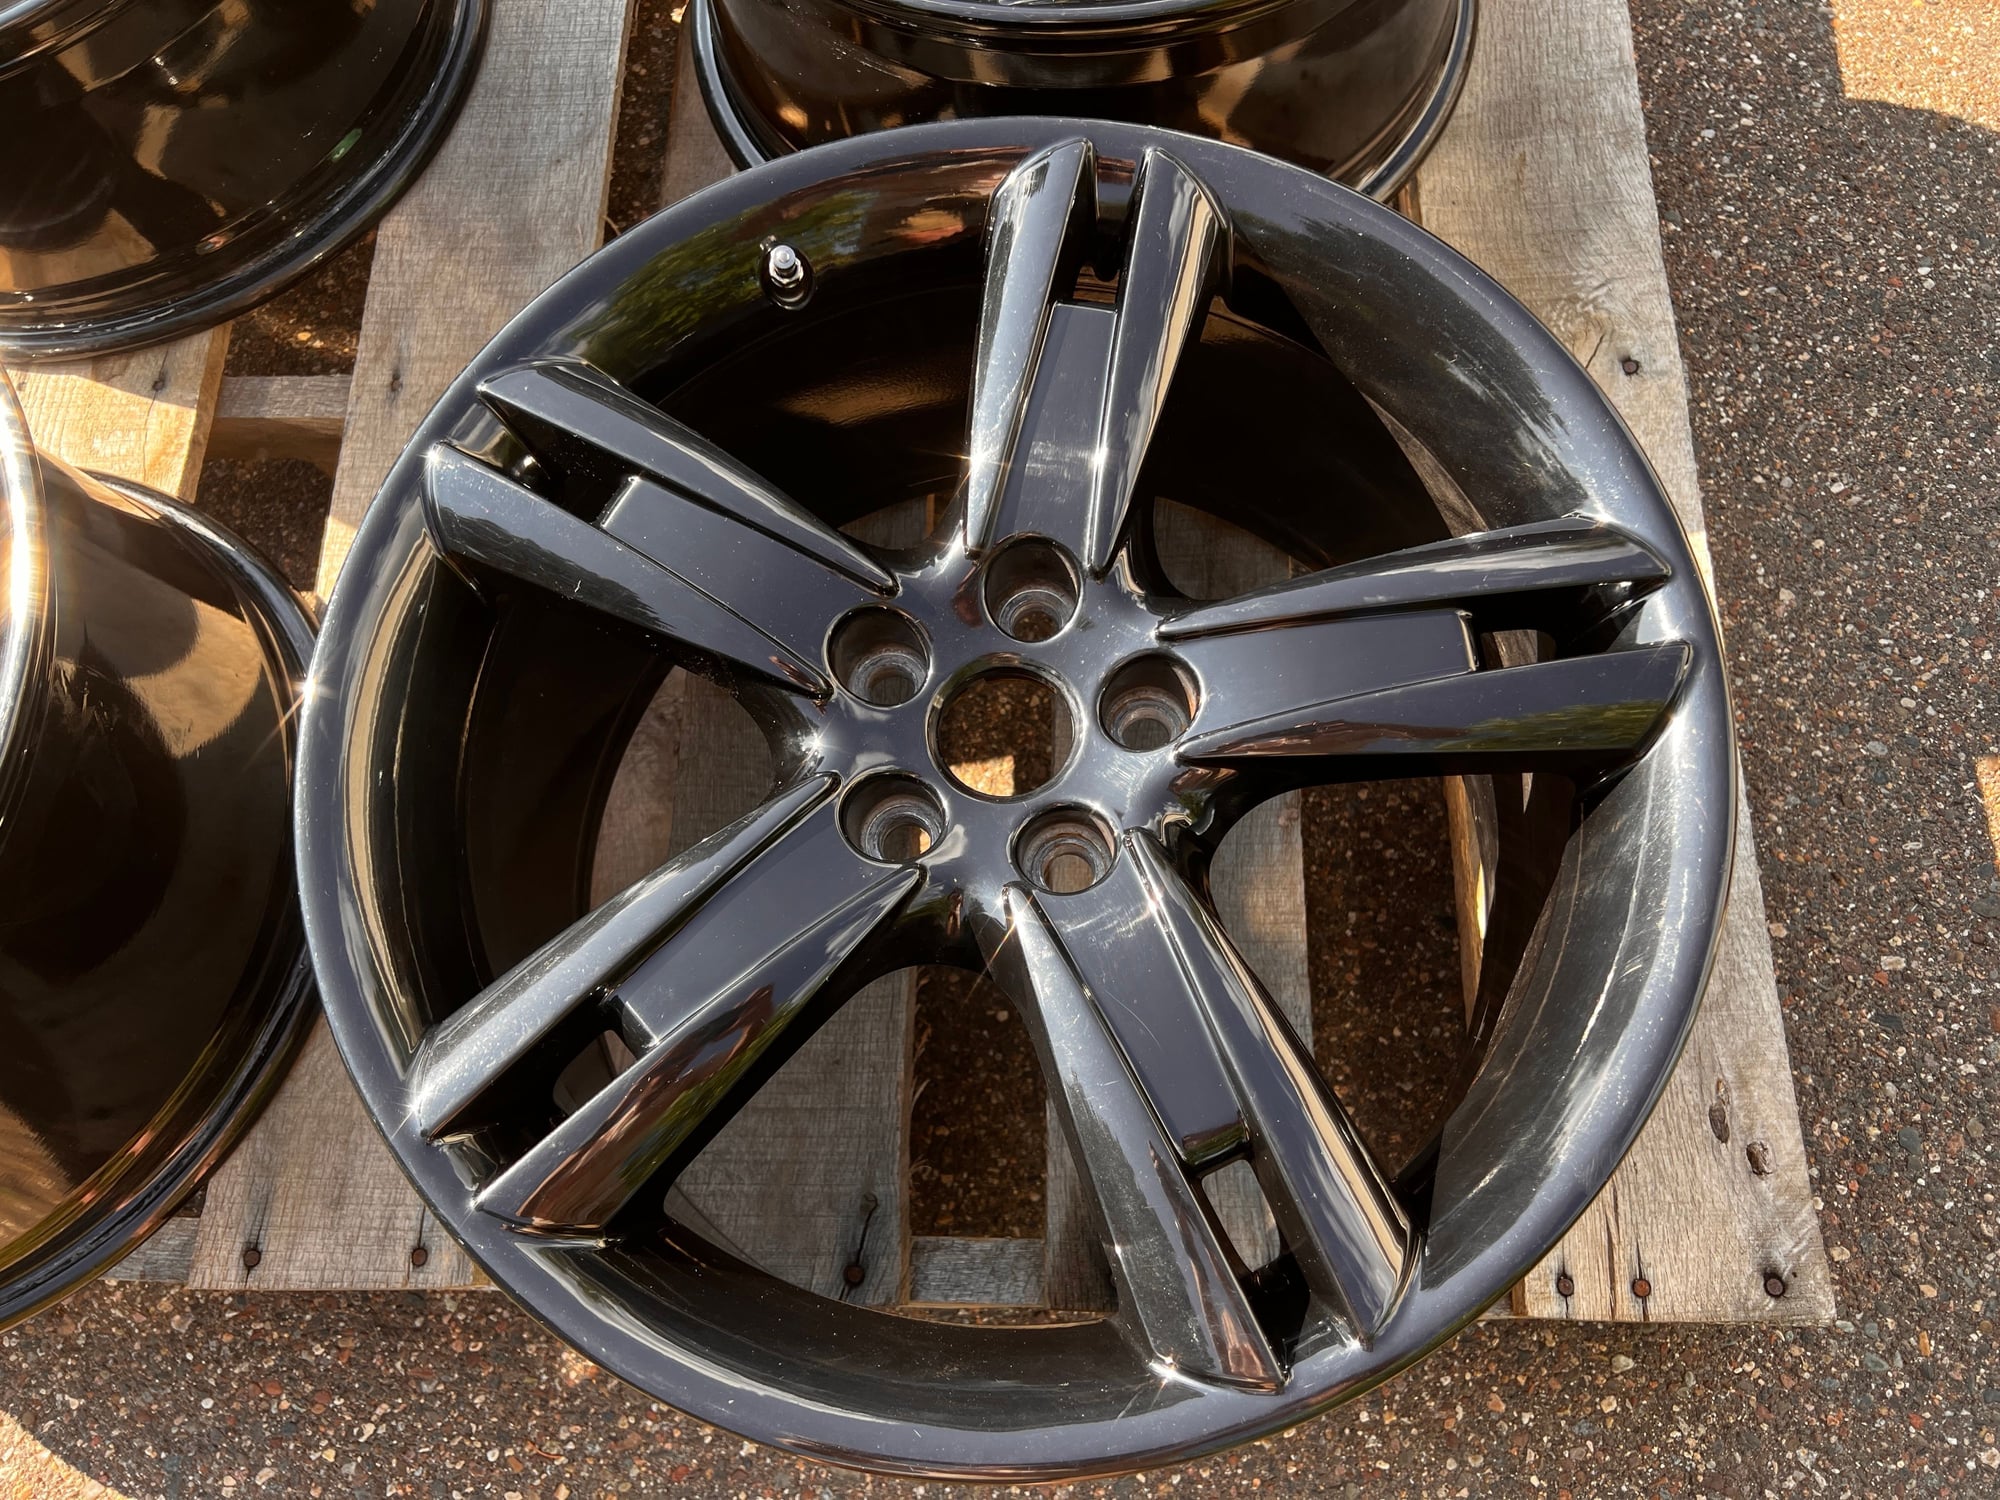 Wheels and Tires/Axles - Set of 4 STR Staggered Wheels - Used - 2000 to 2008 Jaguar S-Type - 2000 to 2006 Lincoln LS - 2002 to 2005 Ford Thunderbird - Minneapolis, MN 55402, United States